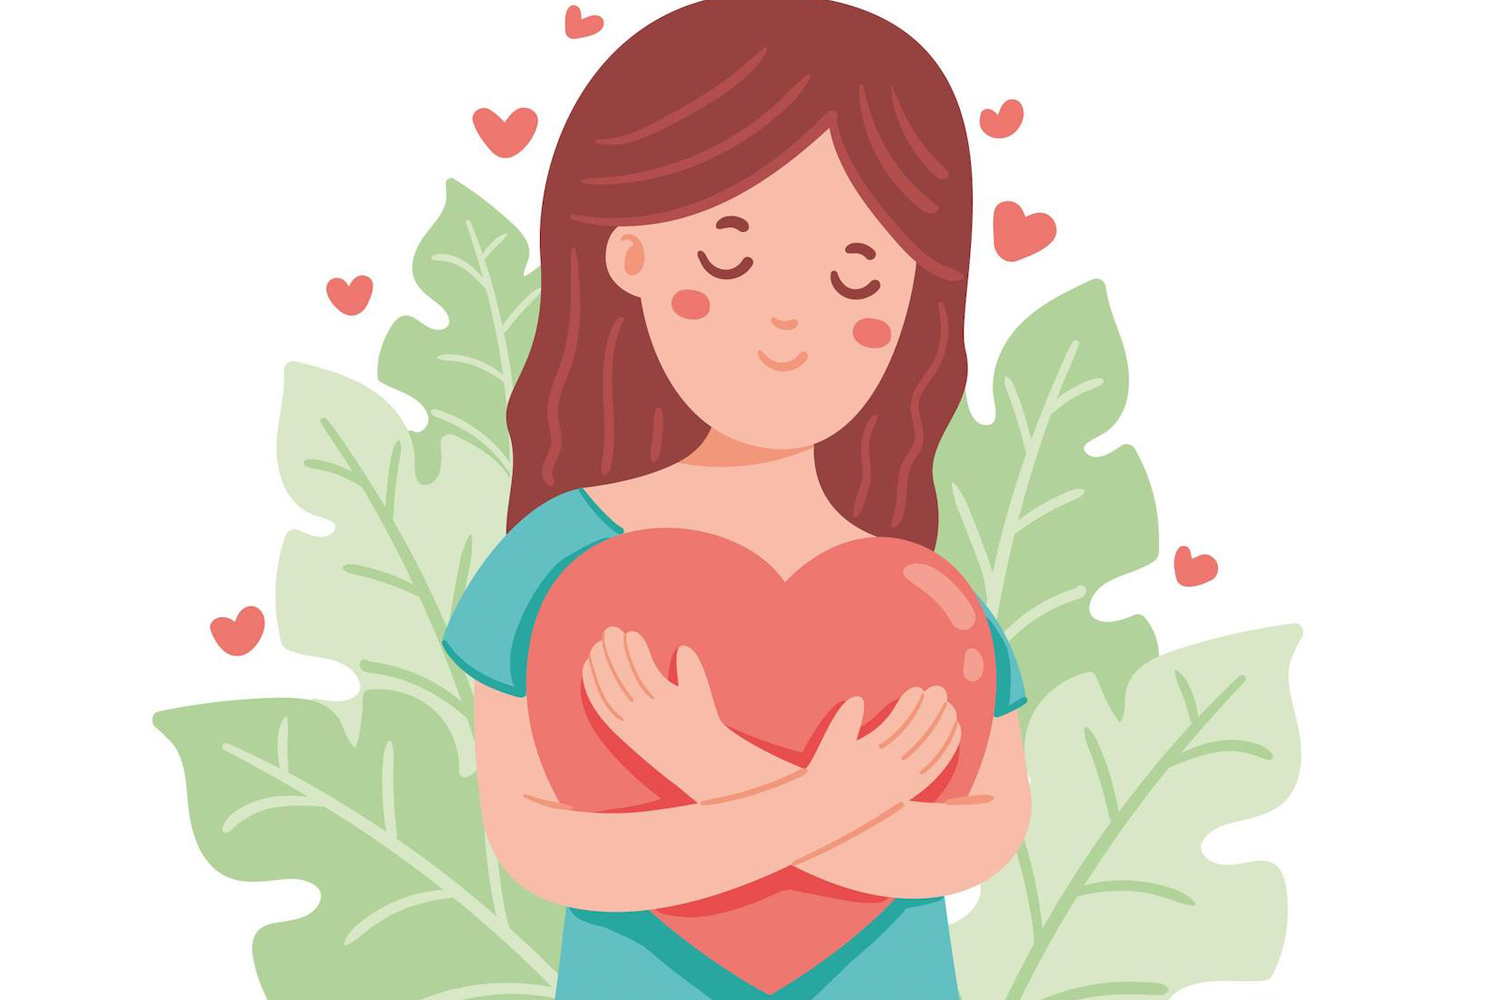 Animation of girl holding a heart. 